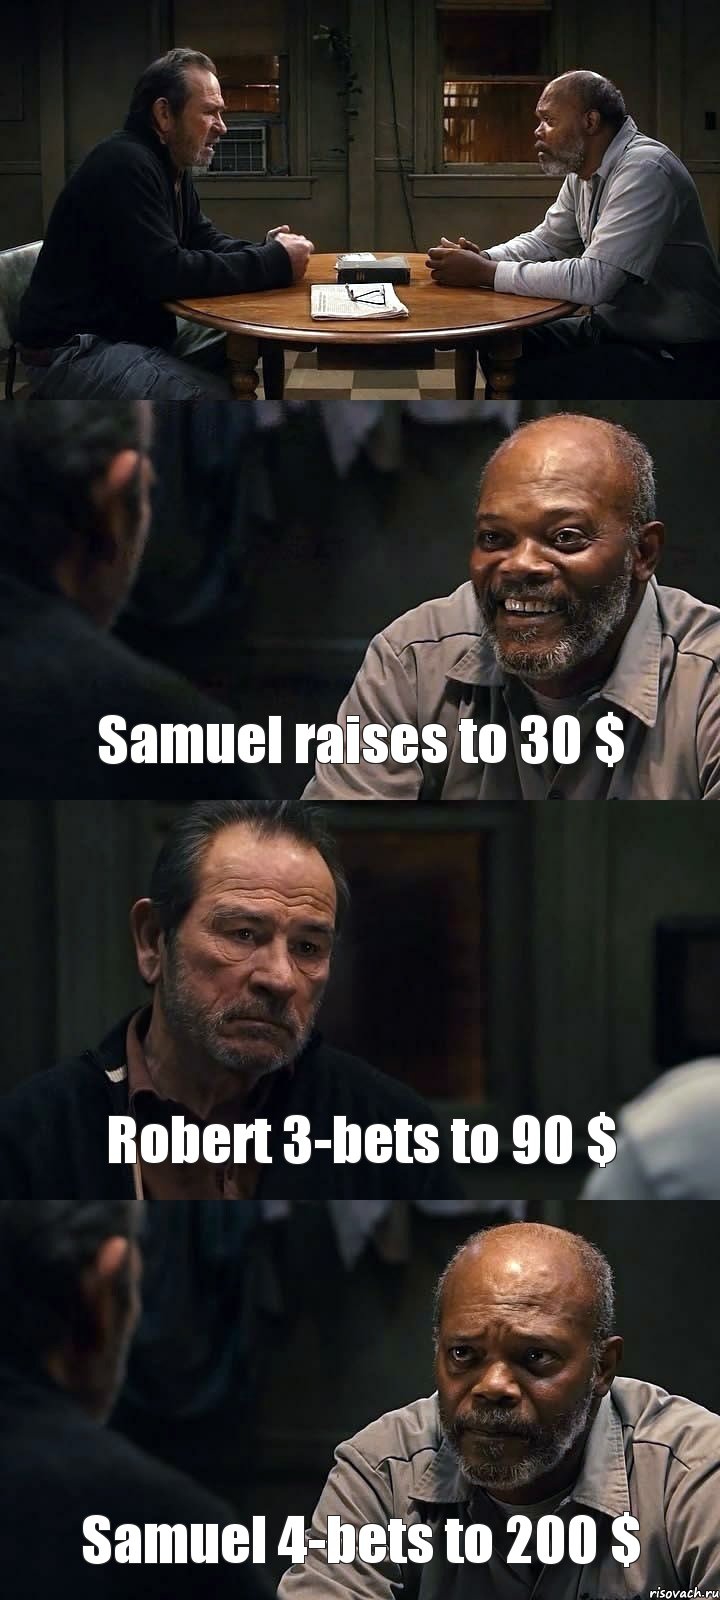  Samuel raises to 30 $ Robert 3-bets to 90 $ Samuel 4-bets to 200 $, Комикс The Sunset Limited